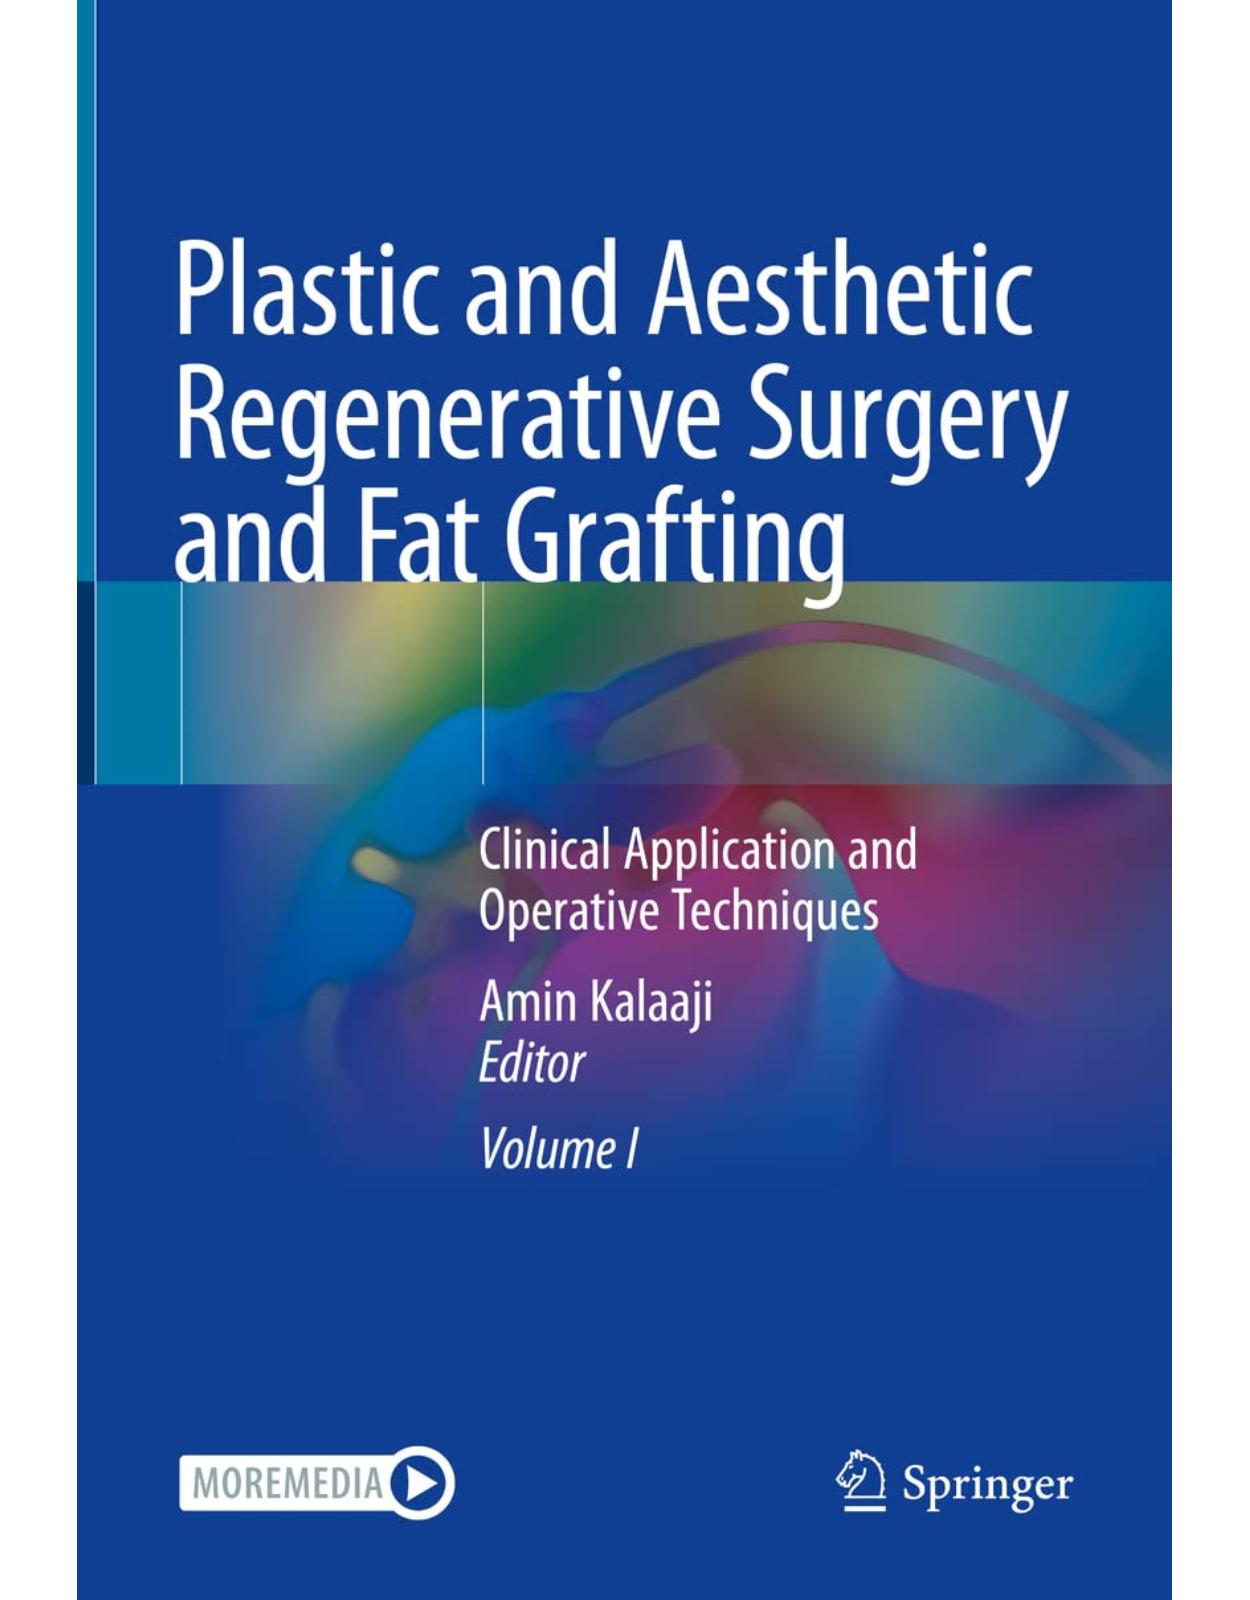 Plastic and Aesthetic Regenerative Surgery and Fat Grafting: Clinical Application and Operative Techniques 